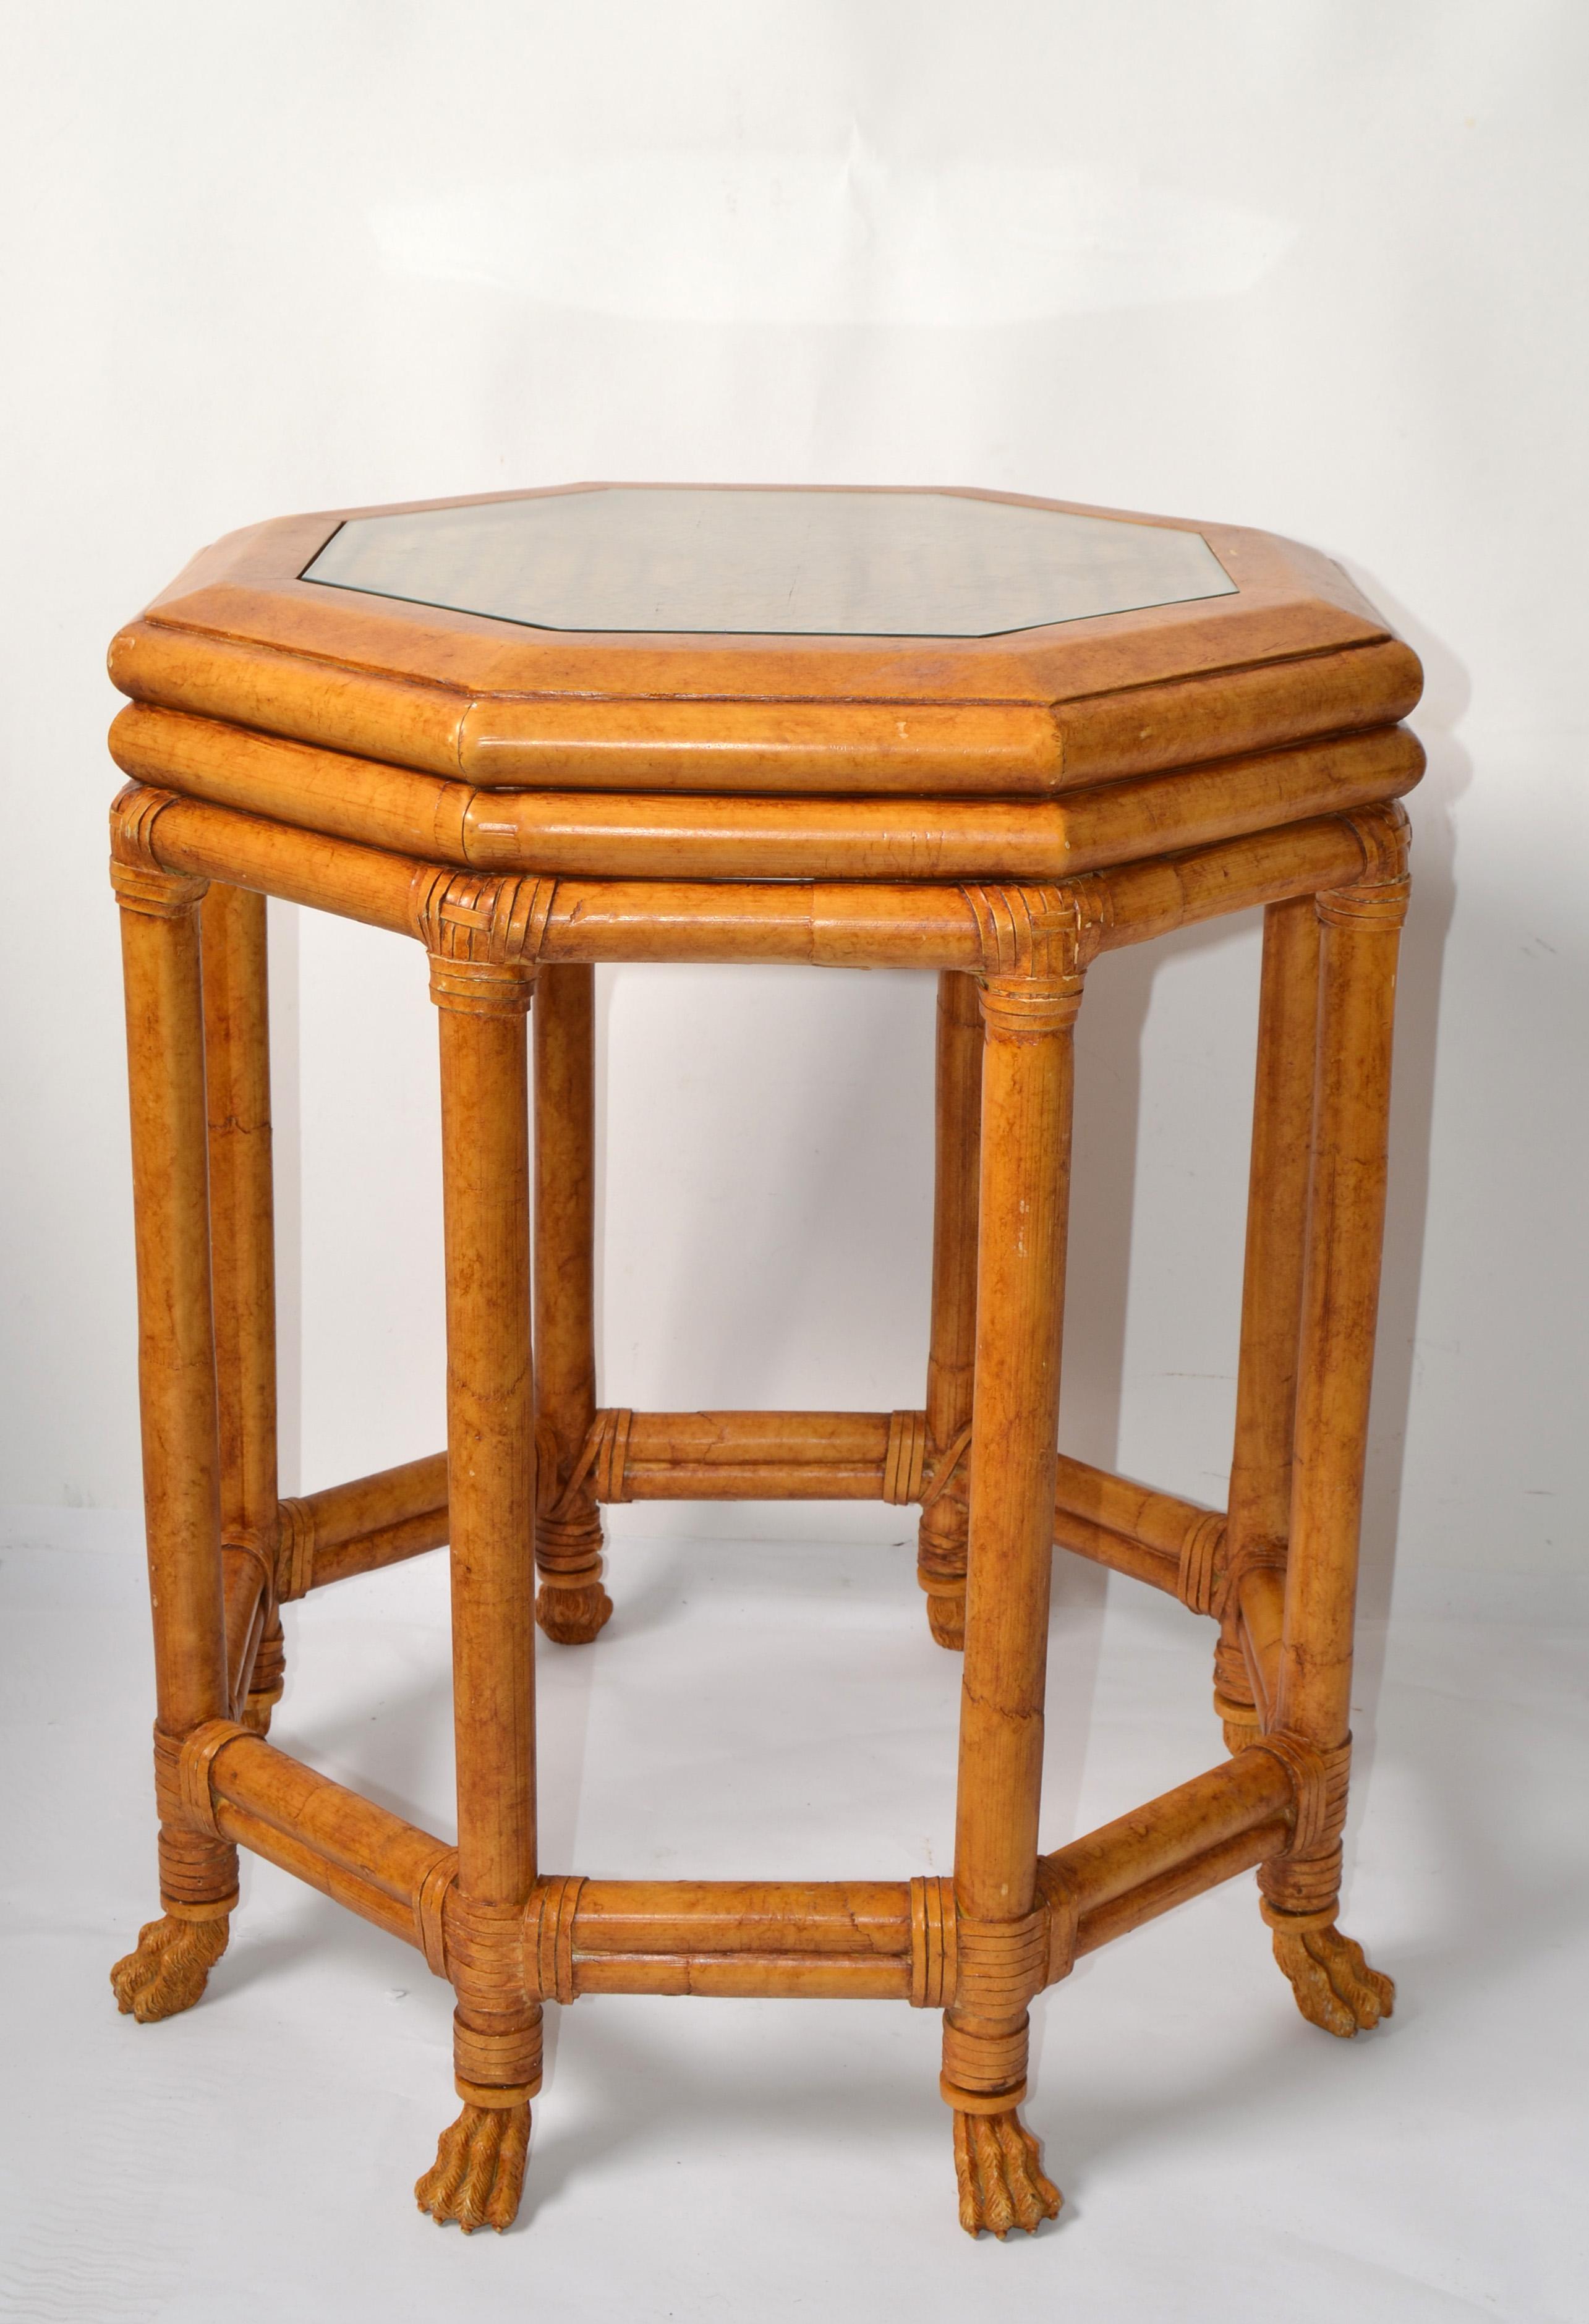 Hollywood Regency McGuire Style Octagonal Bamboo Burl Veneer Leather Bindings Glass Accent Table  For Sale